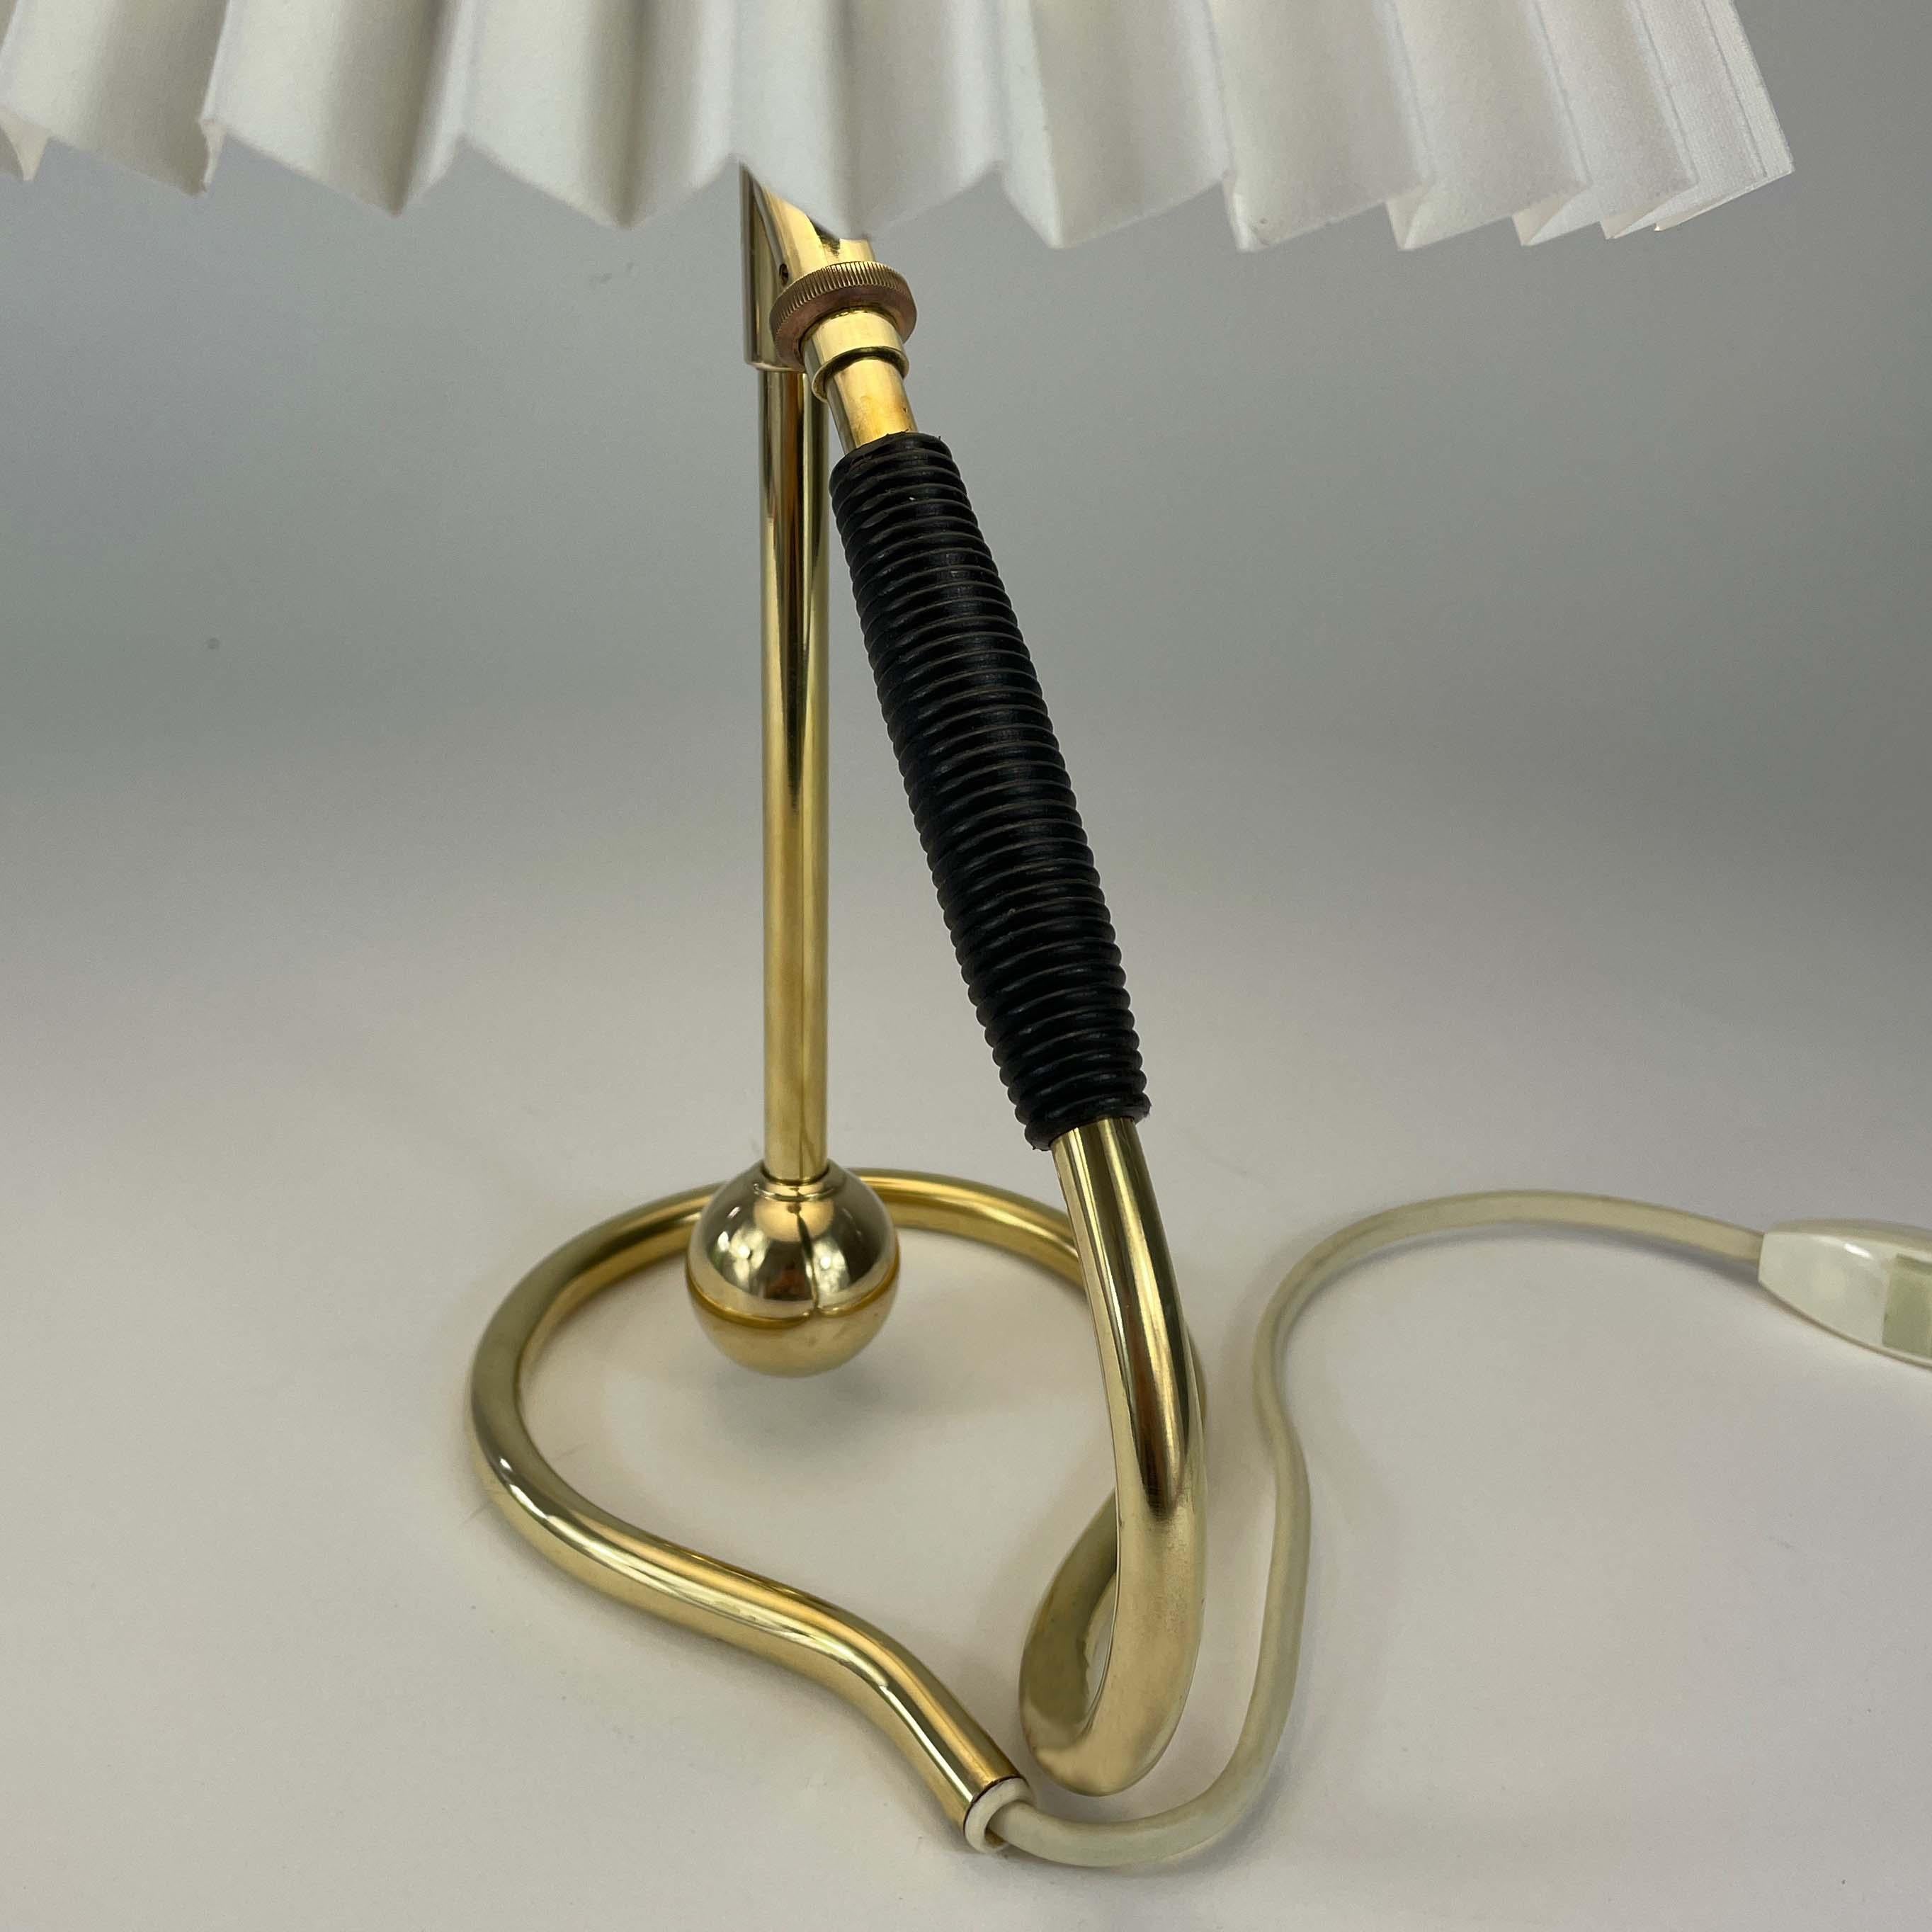 Adjustable Brass and Bakelite Wall and Table Lamp 306 by Kaare Klint, 1950s For Sale 8